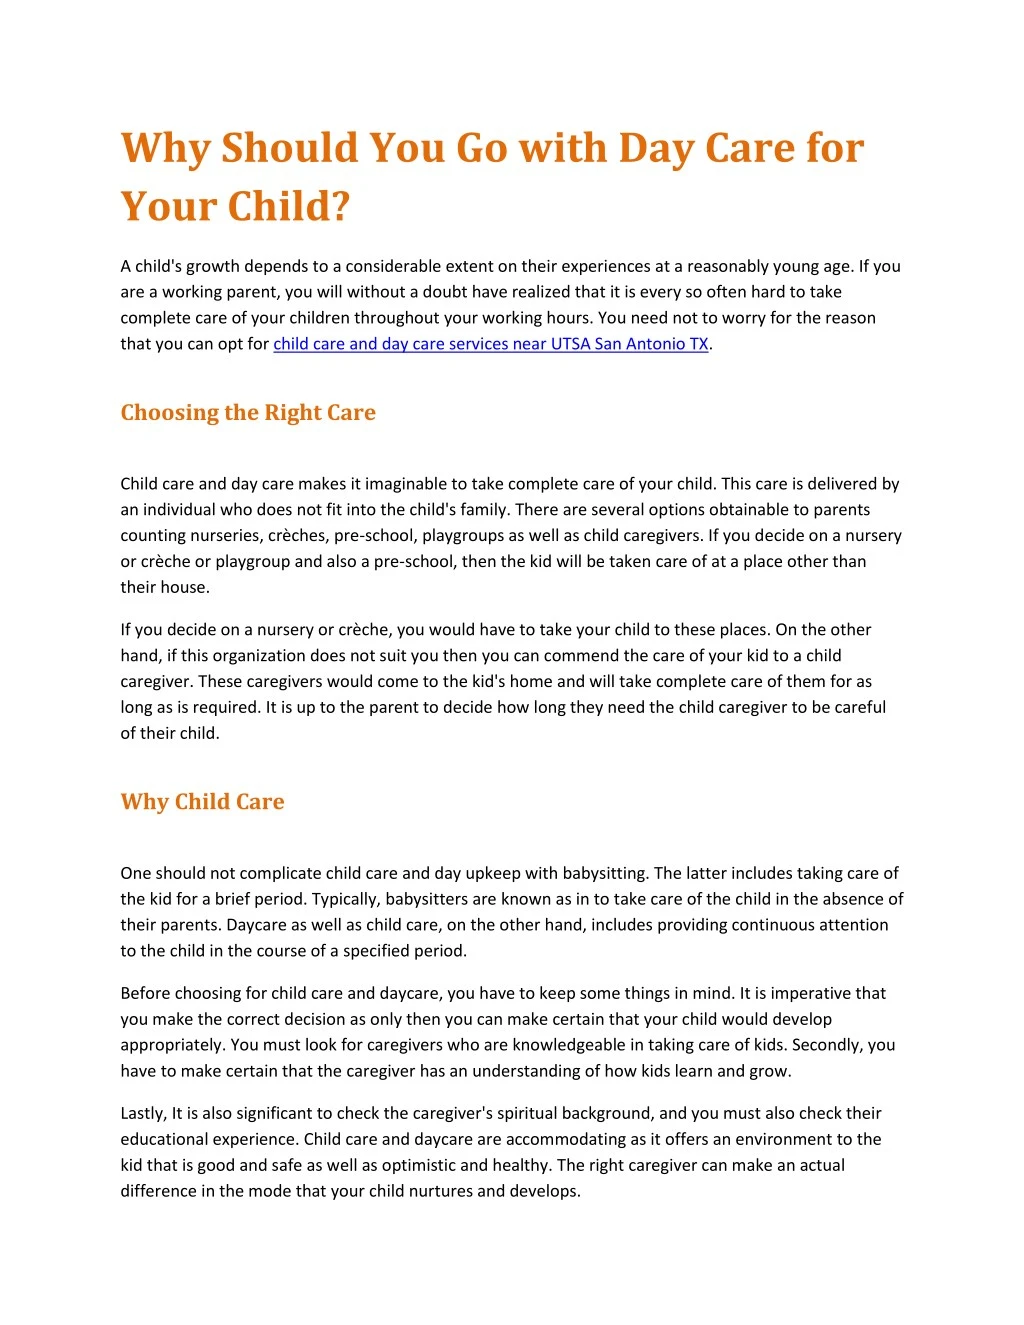 why should you go with day care for your child